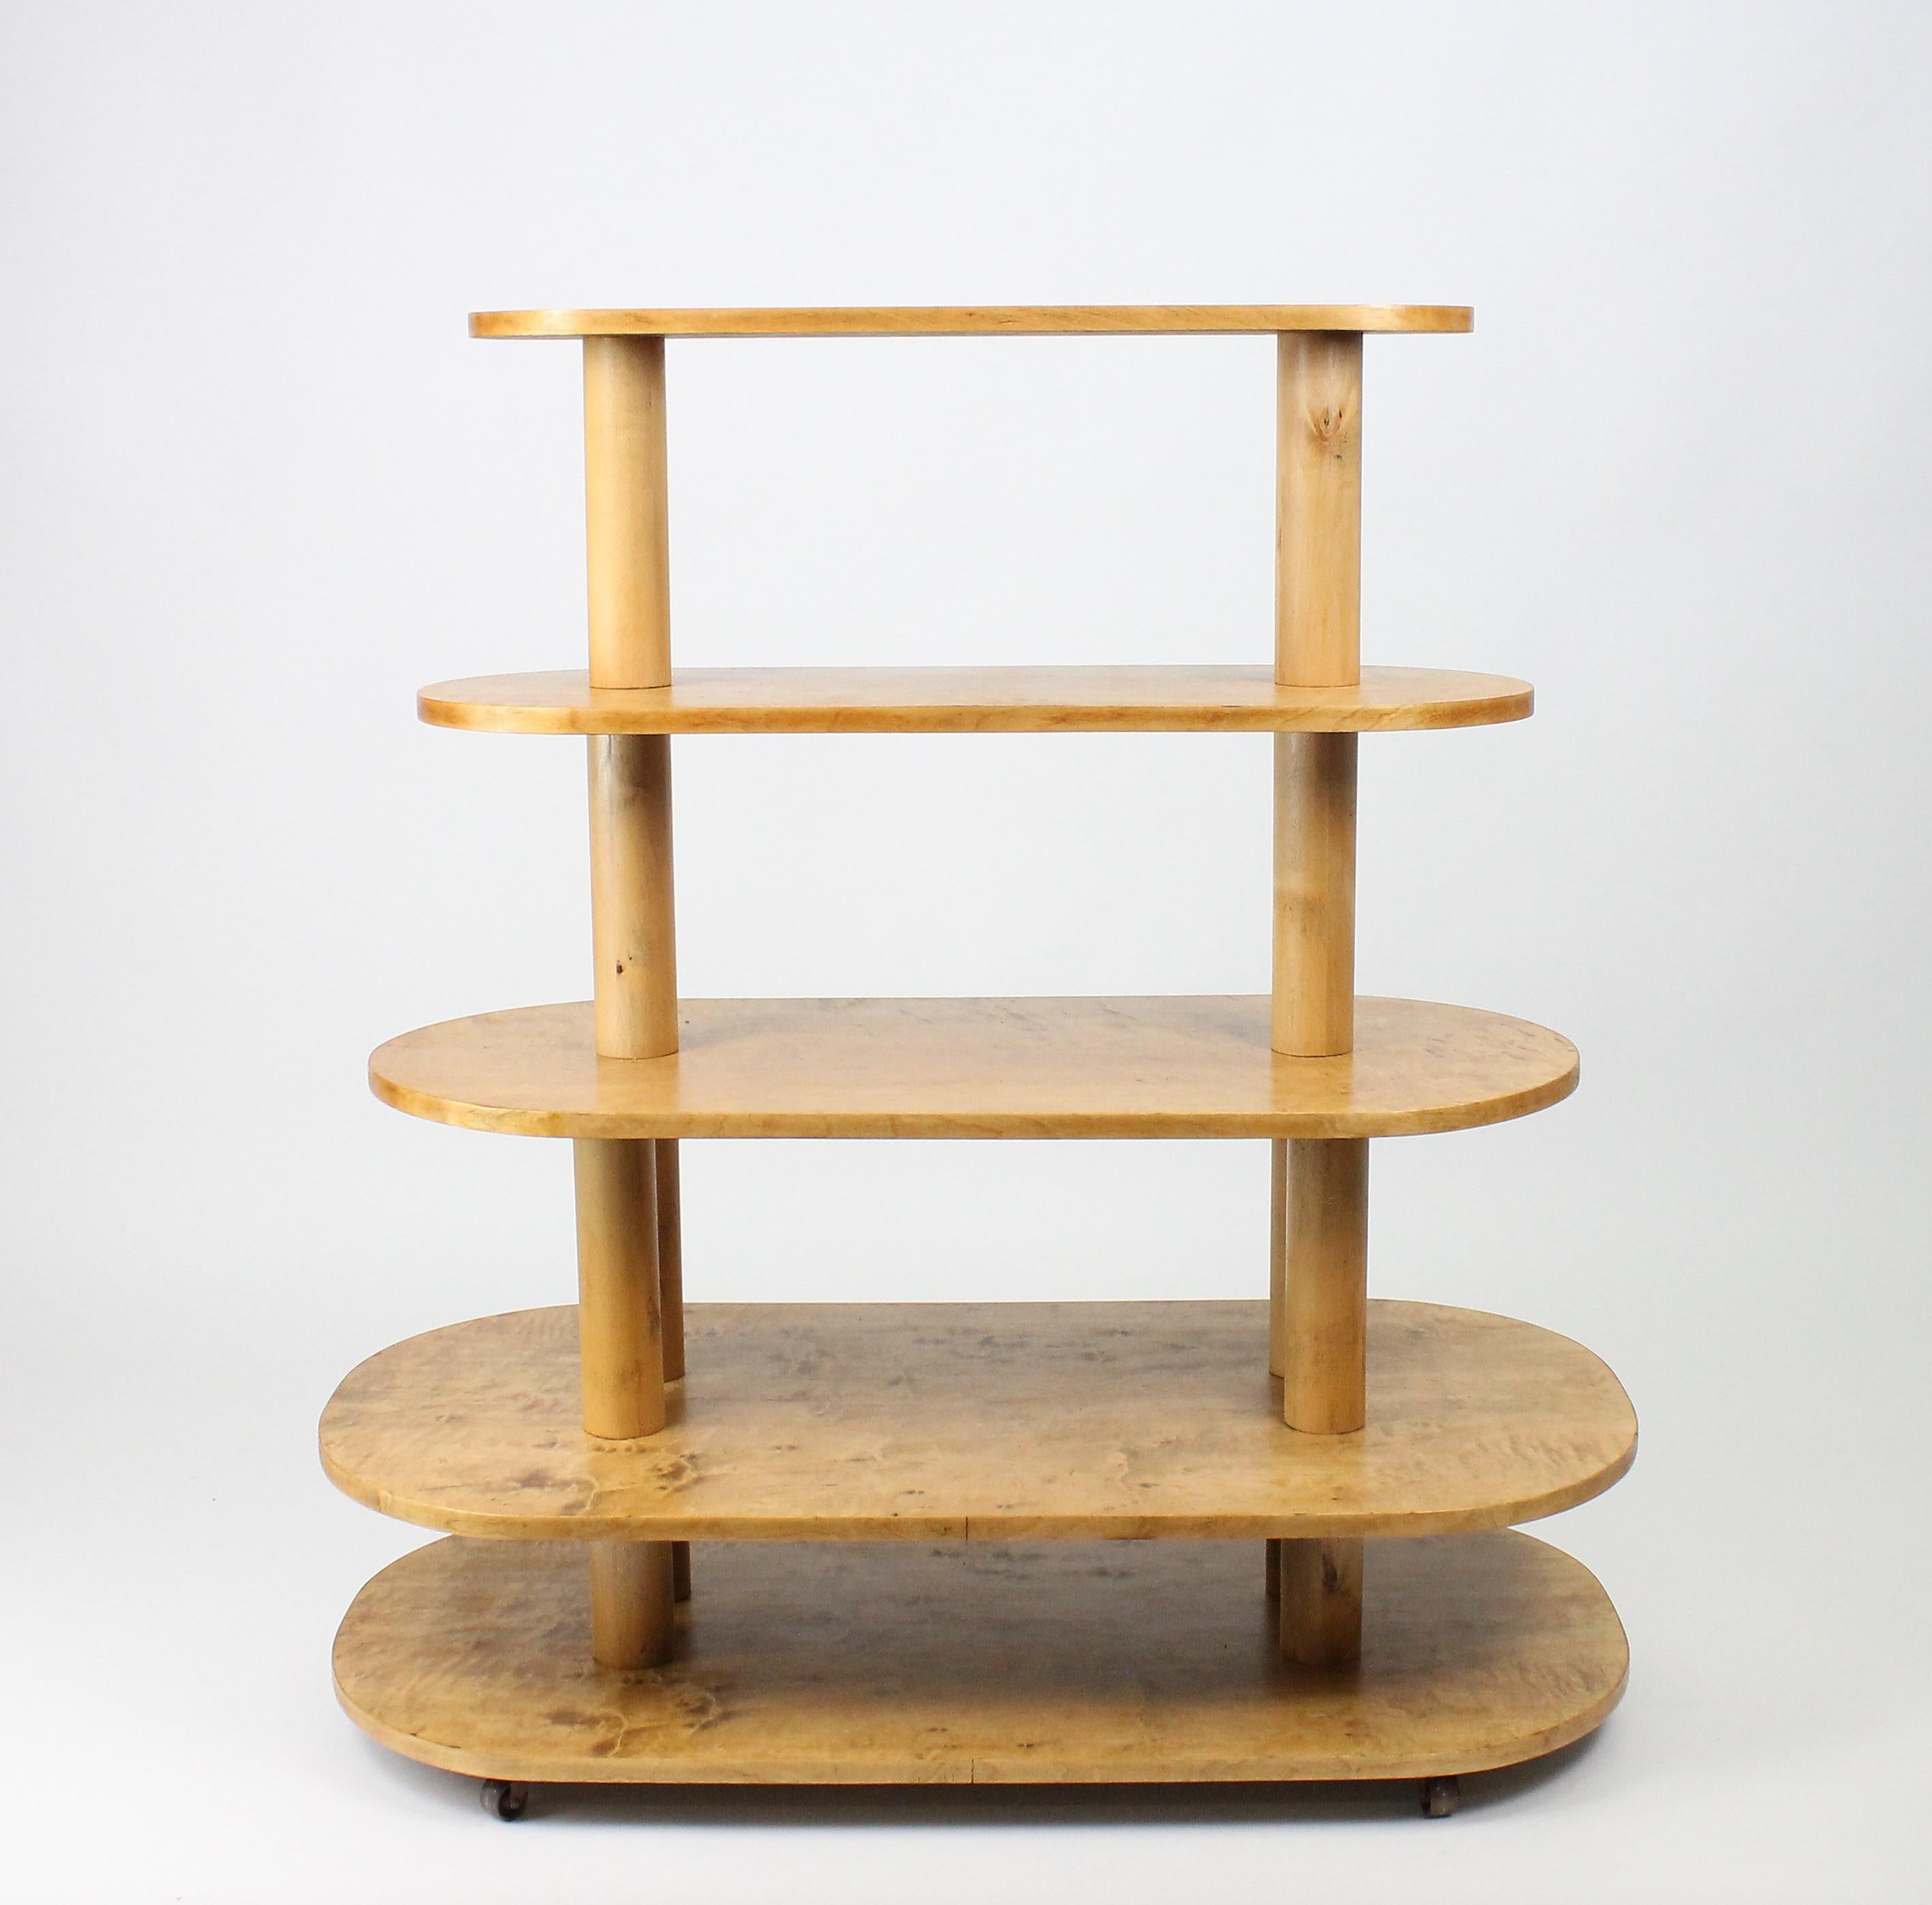 Fantastic shelf made by Nordiska Kompaniet to be used in their own store (NK) in Stockholm. It was used in the 1930s to display different objects that were up for sale. Very rare!

Made in golden birch and now restored into great condition.